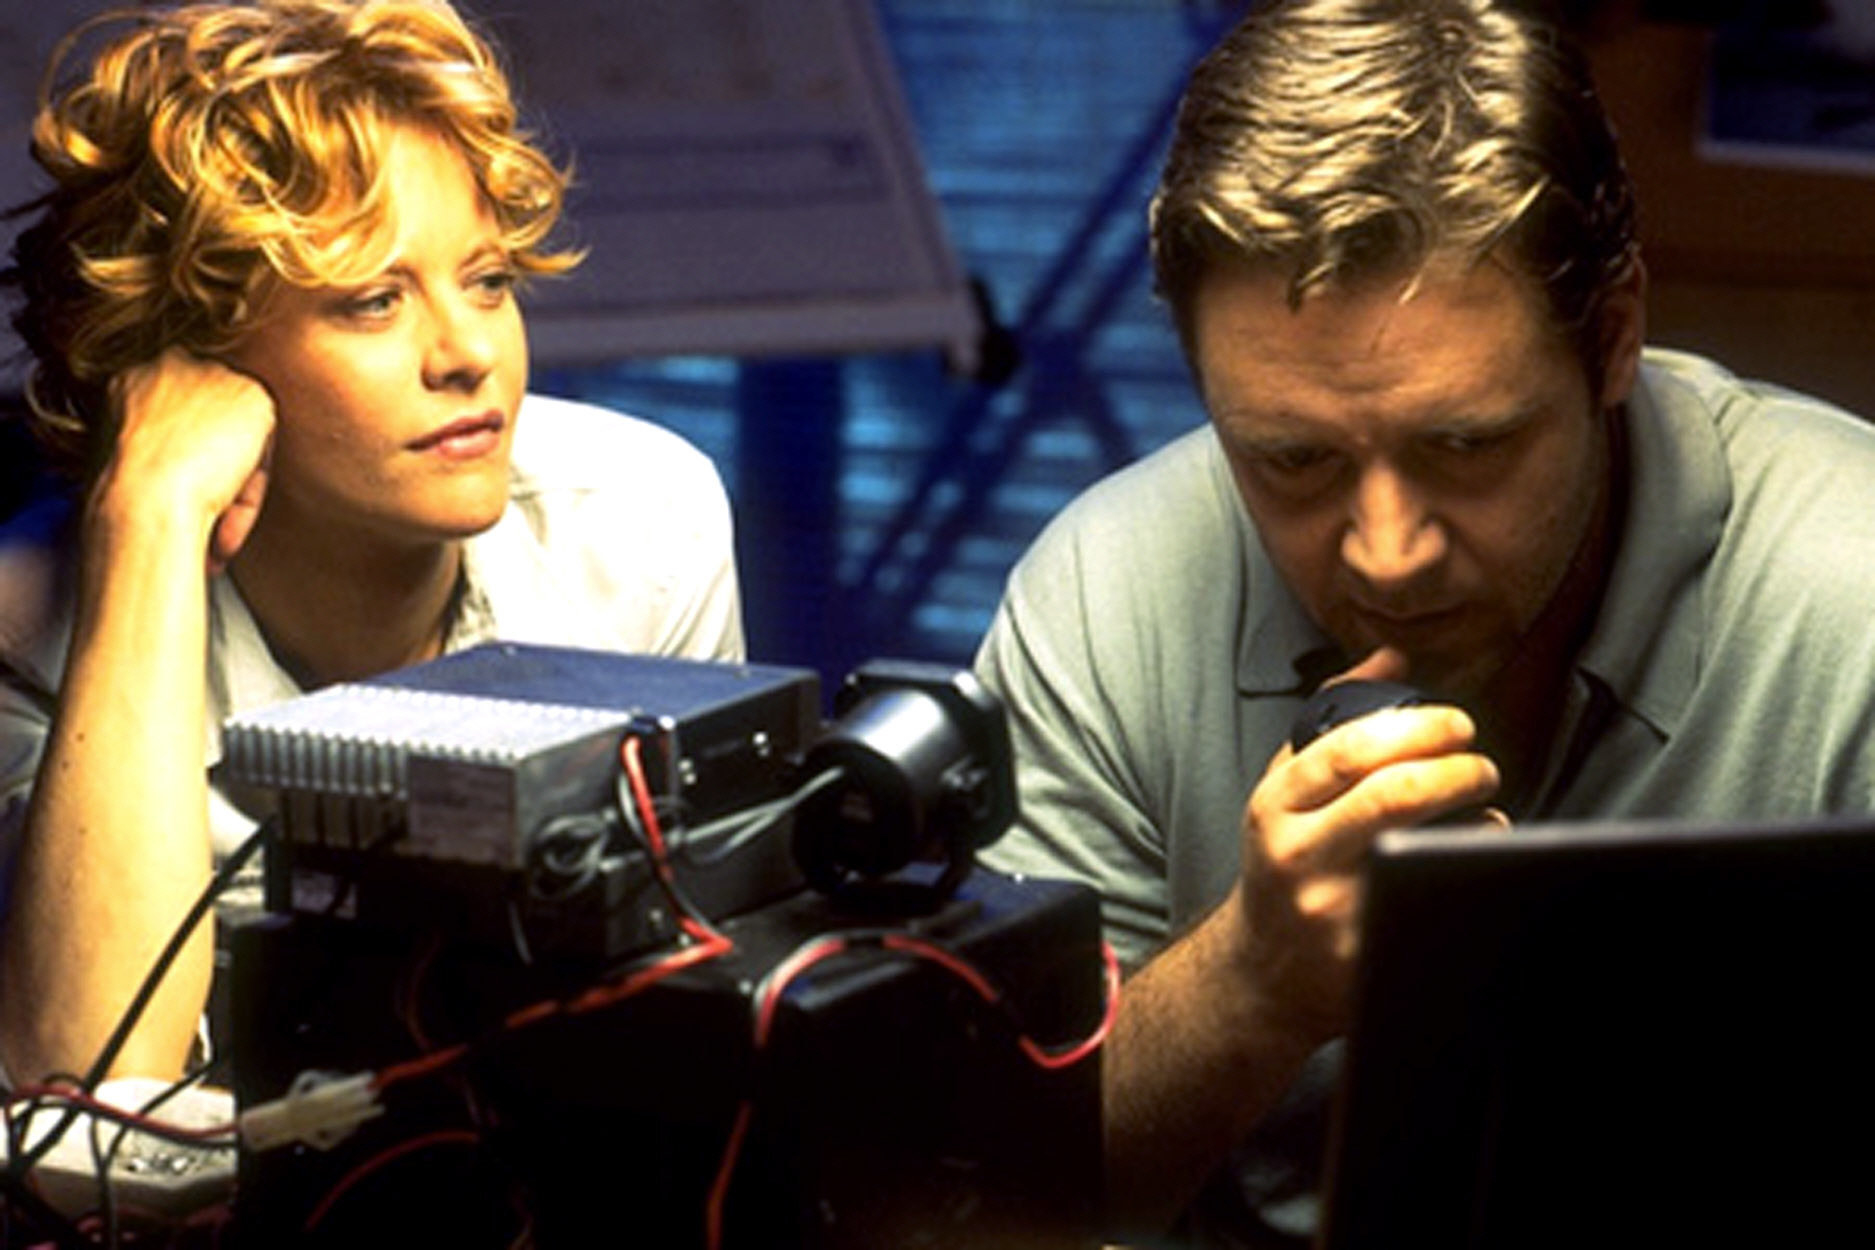 Meg Ryan and Russell Crow sitting together by a computer